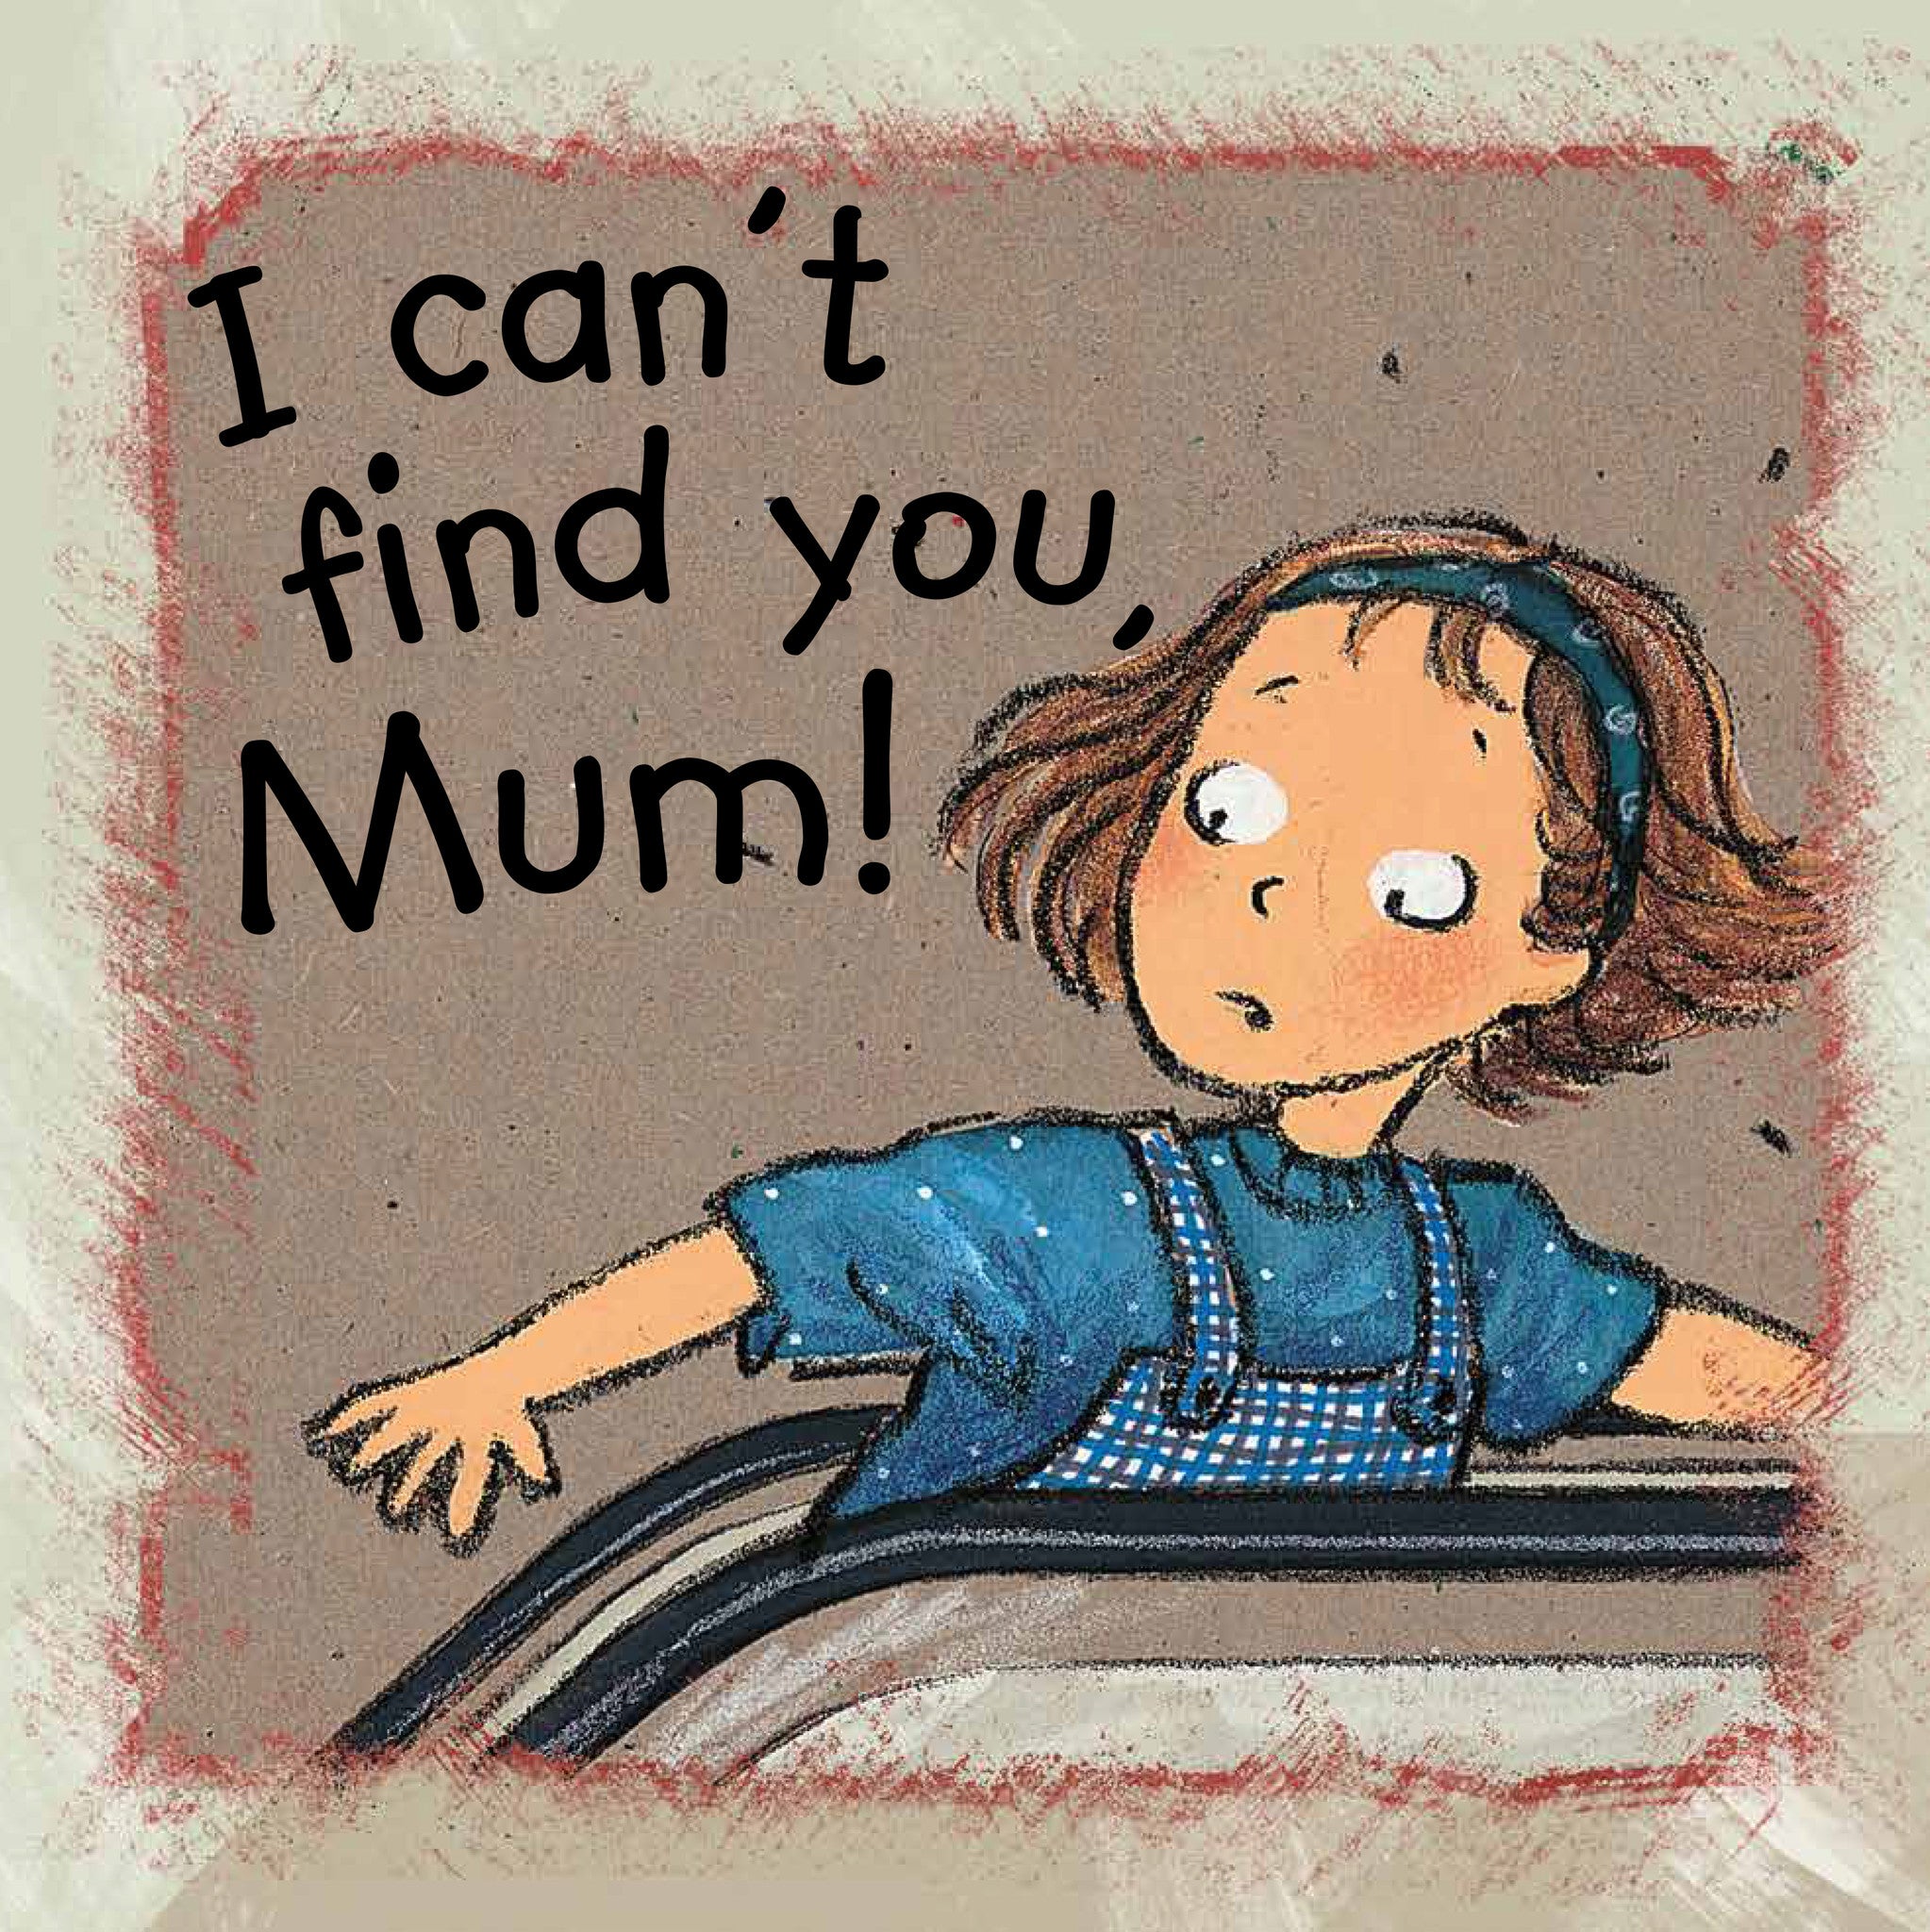 I can’t find you, Mum!